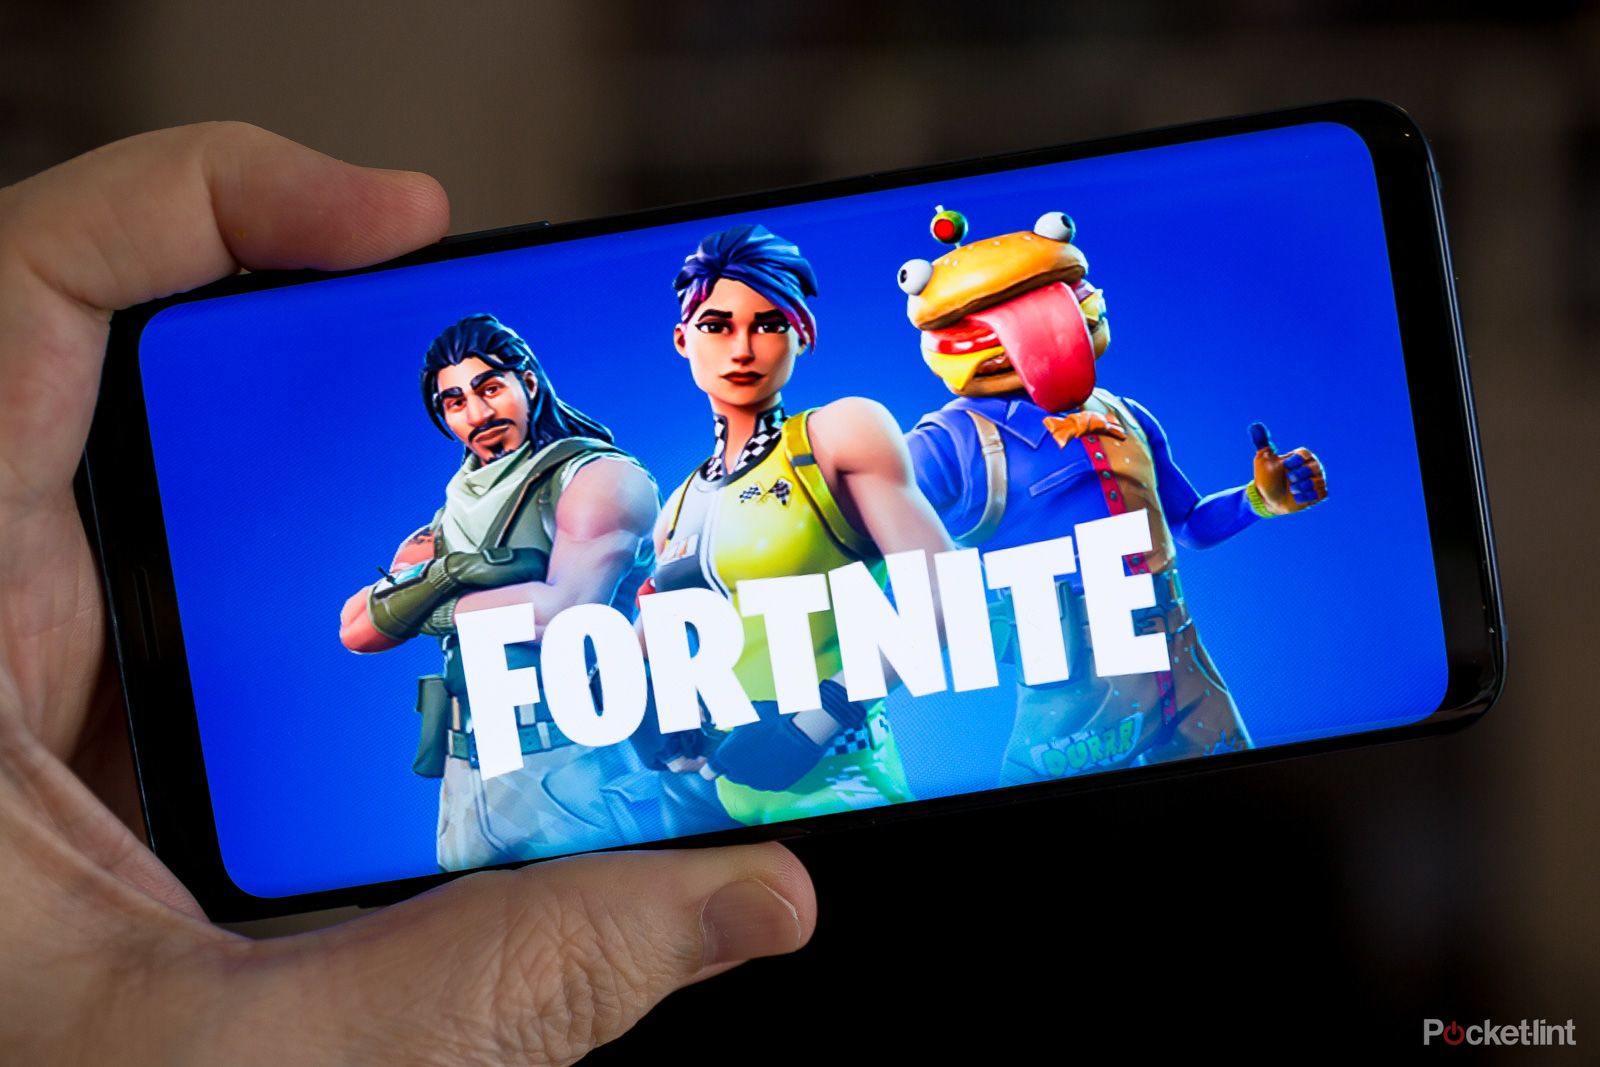 Hello, in the first few years of playing Fortnite on Android, I